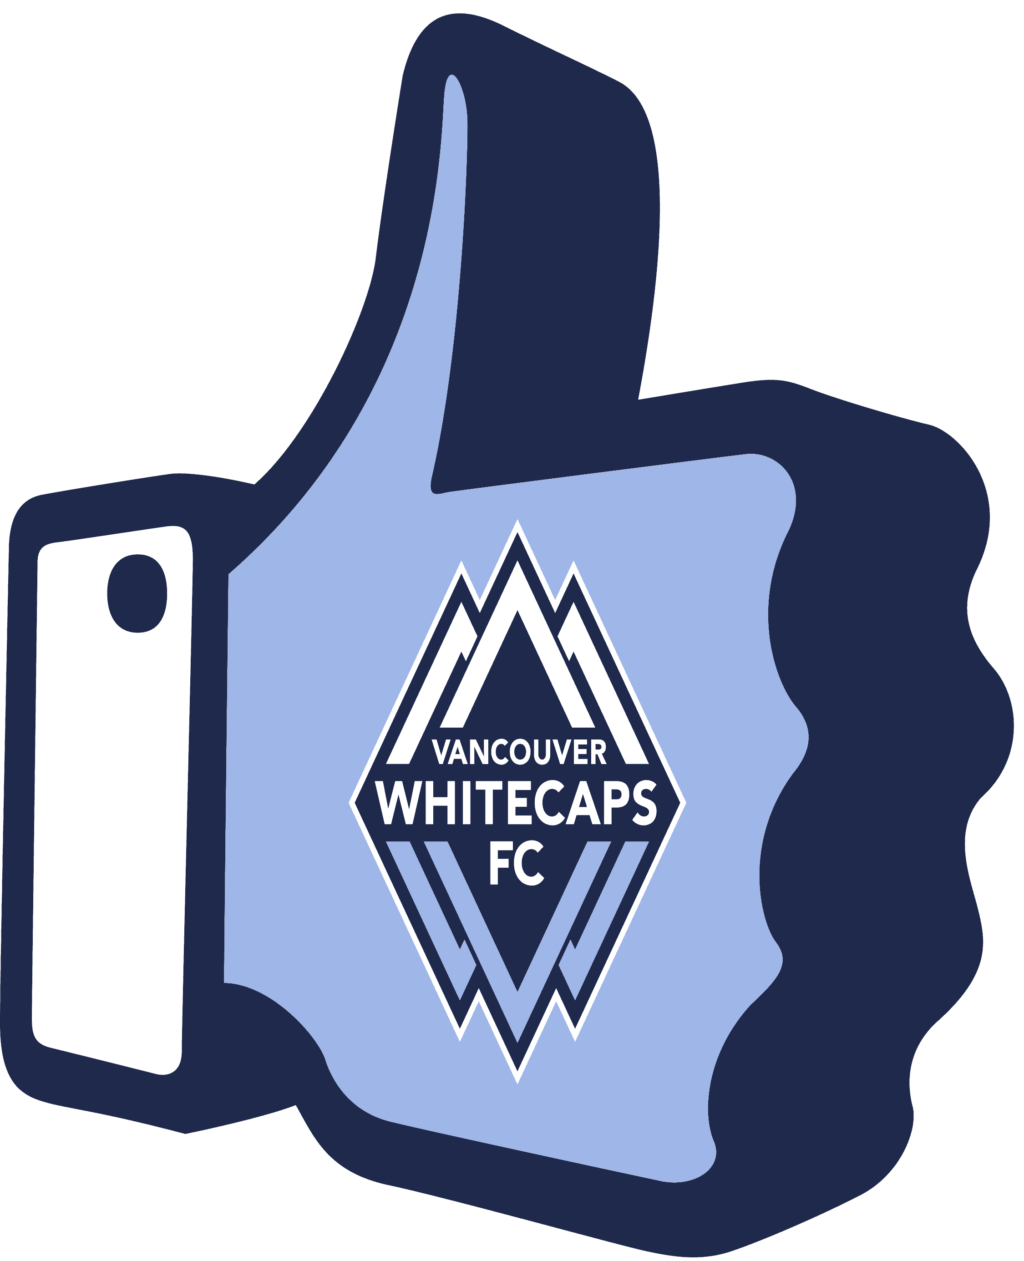 vancouver whitecaps fc 15 MLS Logo Vancouver Whitecaps FC, Vancouver Whitecaps FC SVG, Vector Vancouver Whitecaps FC, Clipart Vancouver Whitecaps FC, Football Kit Vancouver Whitecaps FC, SVG, DXF, PNG, Soccer Logo Vector Vancouver Whitecaps FC EPS download MLS-files for silhouette, Vancouver Whitecaps FC files for clipping.